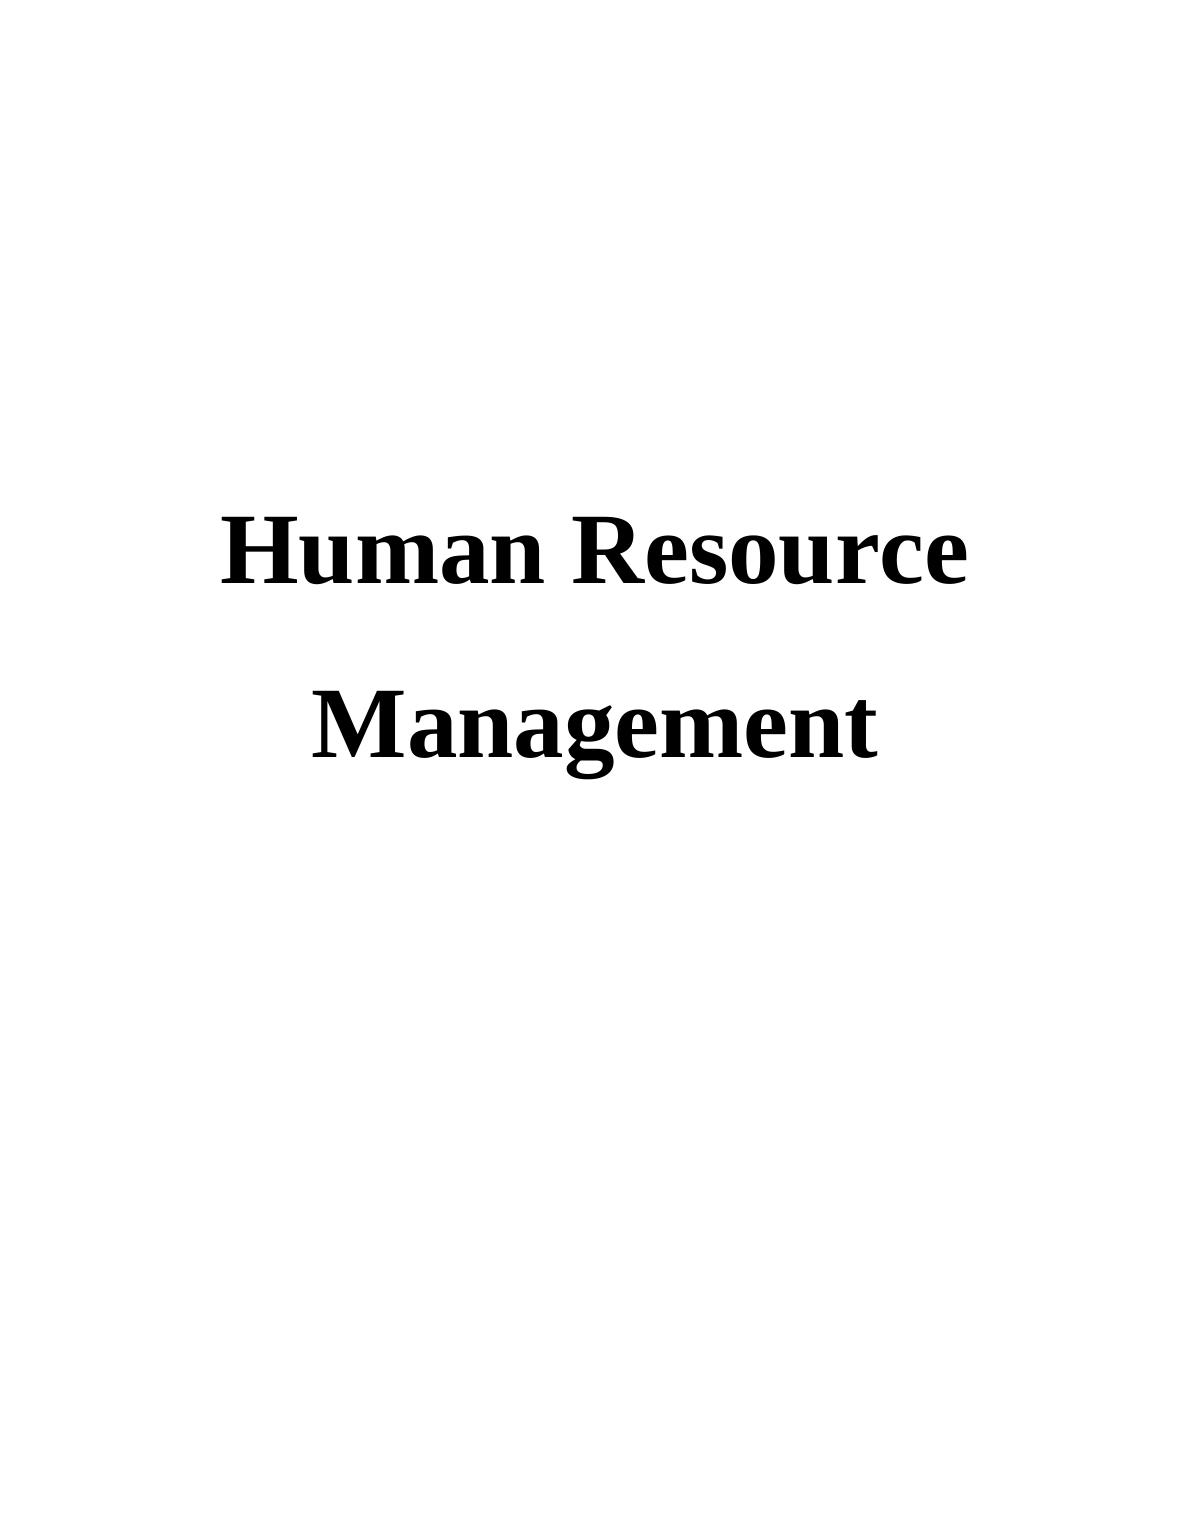 Evaluation of HRM Approaches to Recruitment and Selection_1